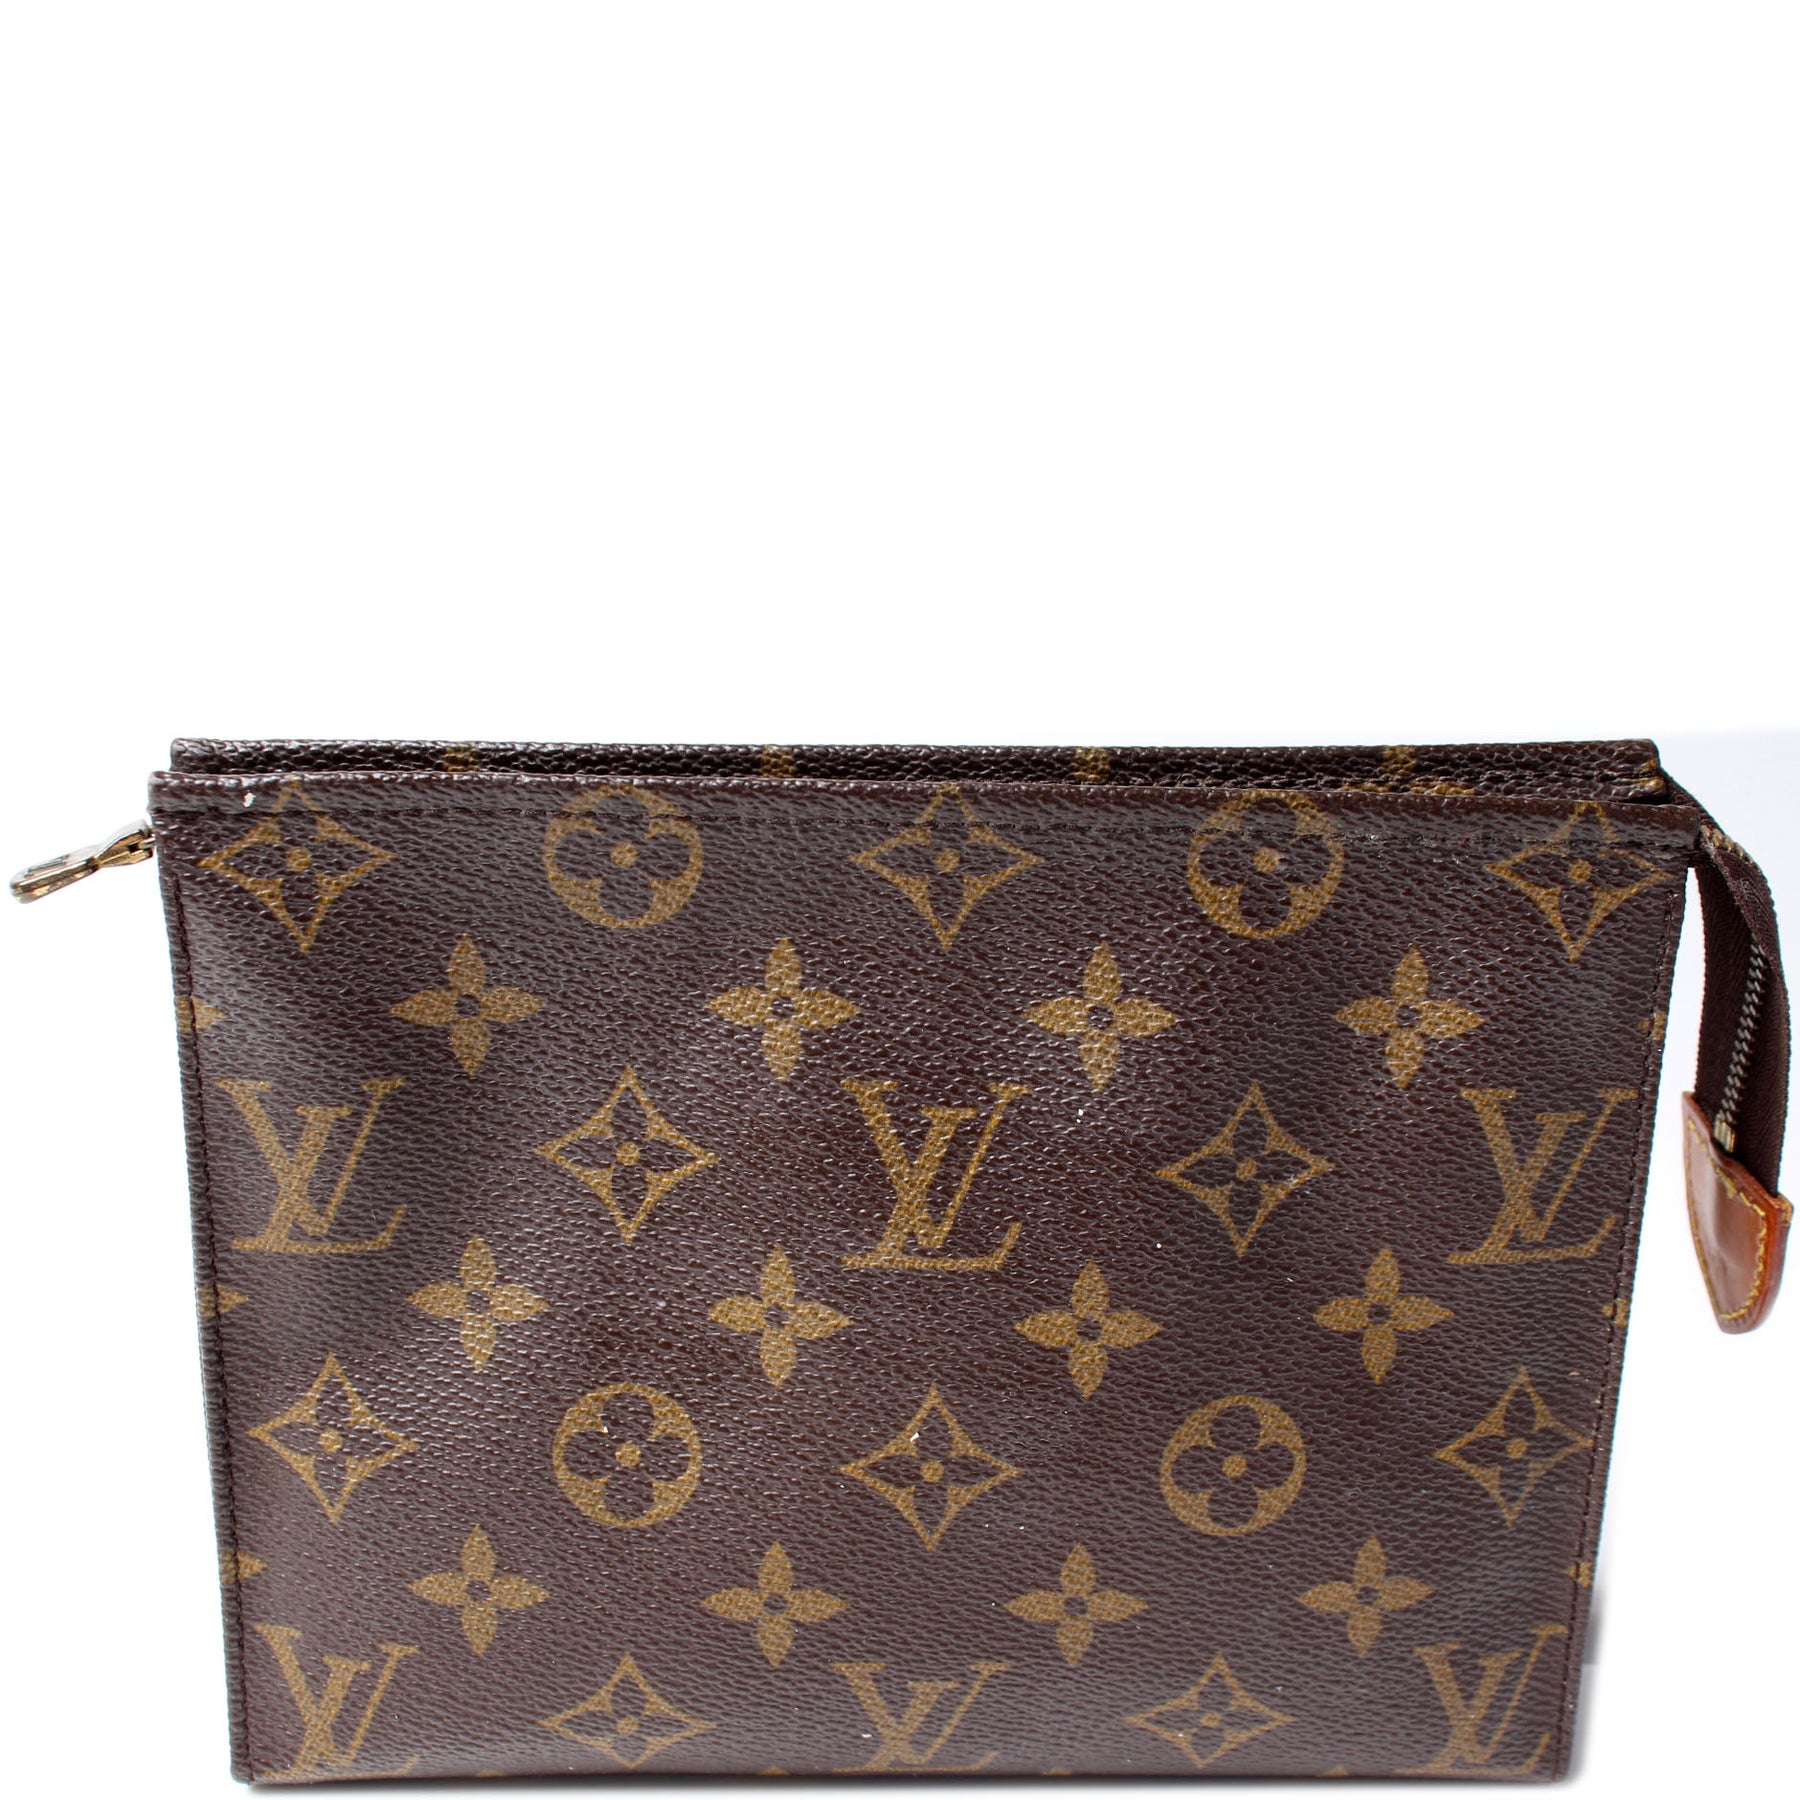 AUTHENTIC LOUIS VUITTON TOILETRY 19 + Complimentary Accessories